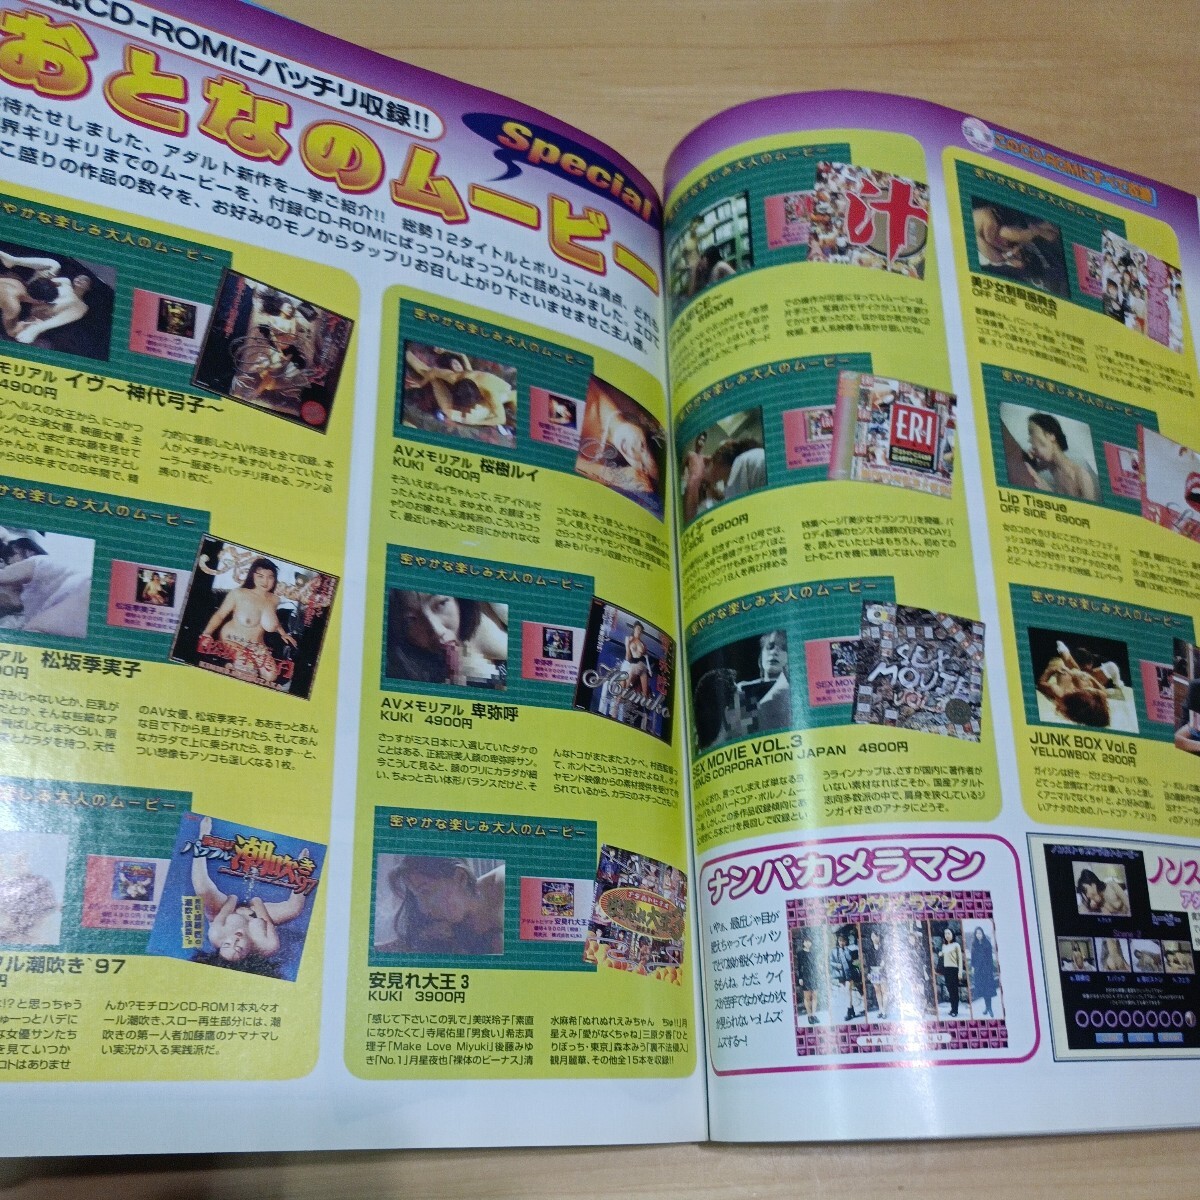 DOS/V USER 1997 8 month number CD-ROM attaching "Treasure Island" company idol adult DOSV USERdosbi